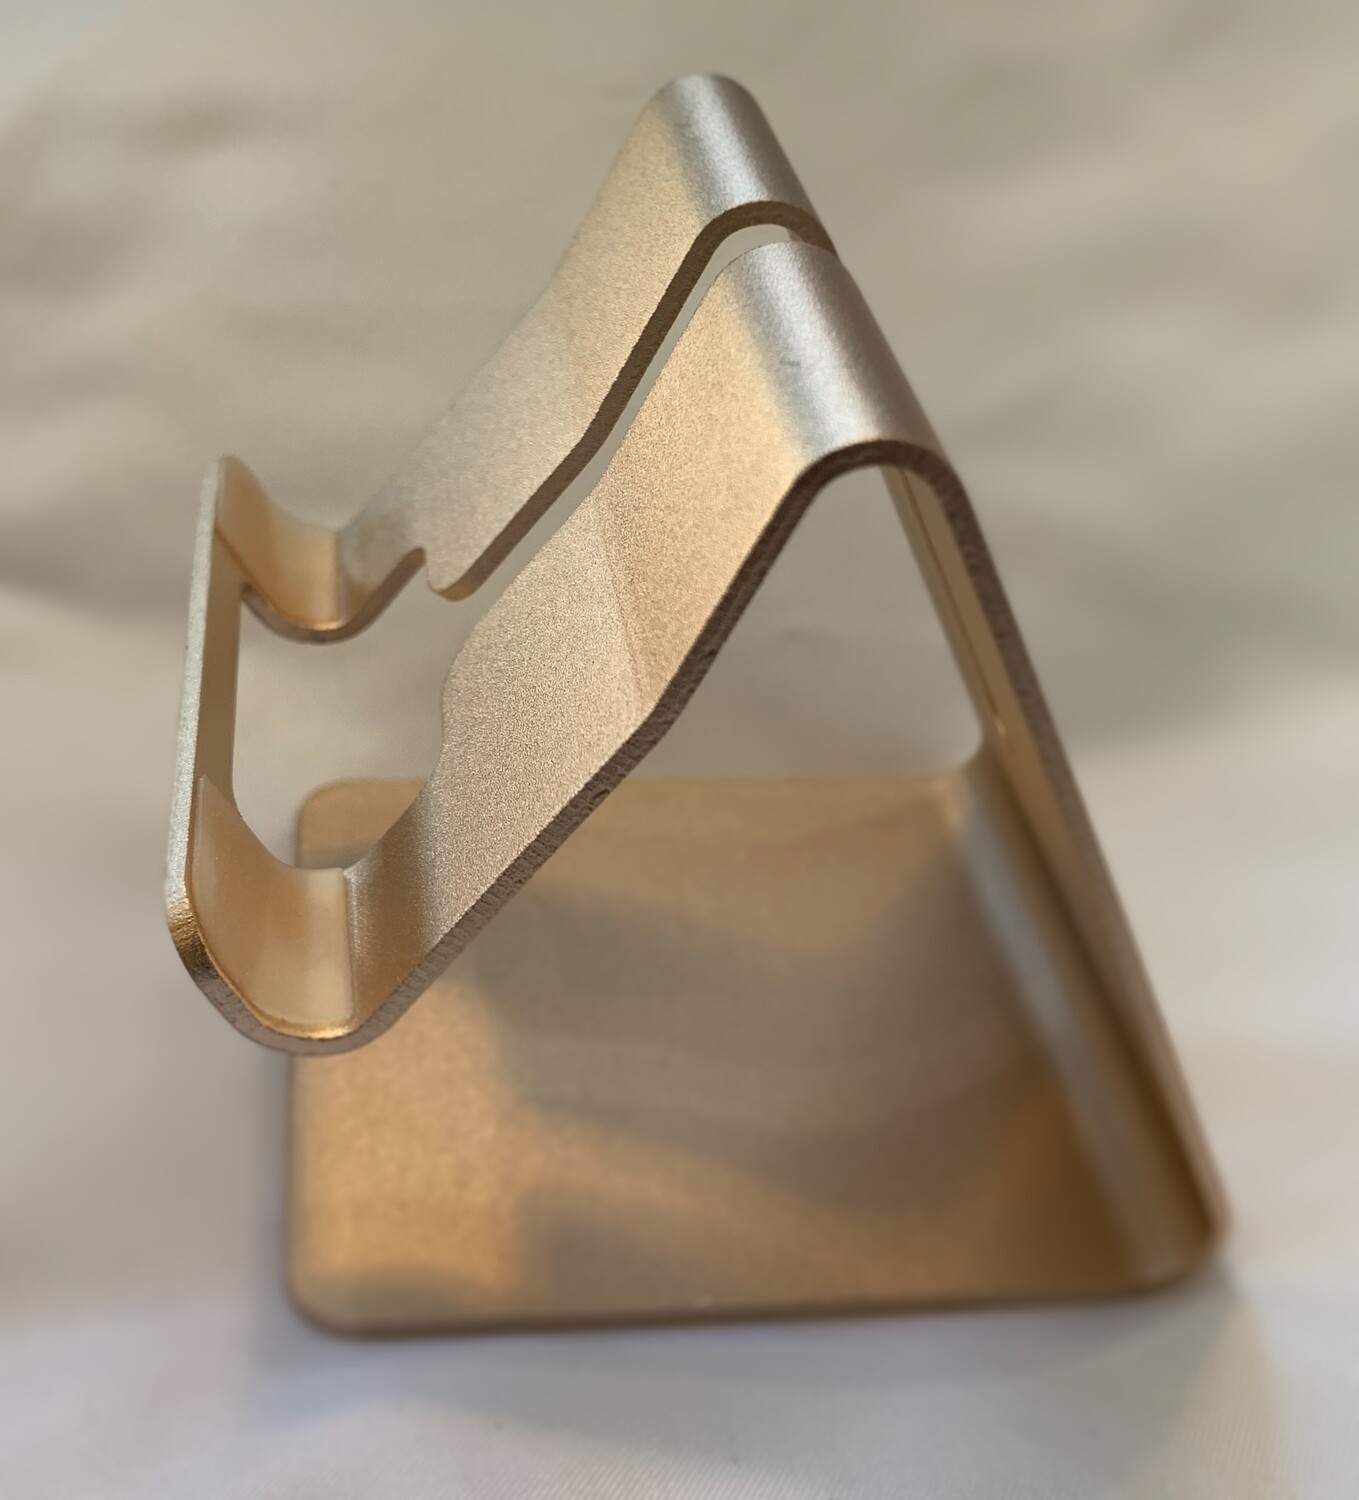 Universal Cellphone Stand Holder (Gold)